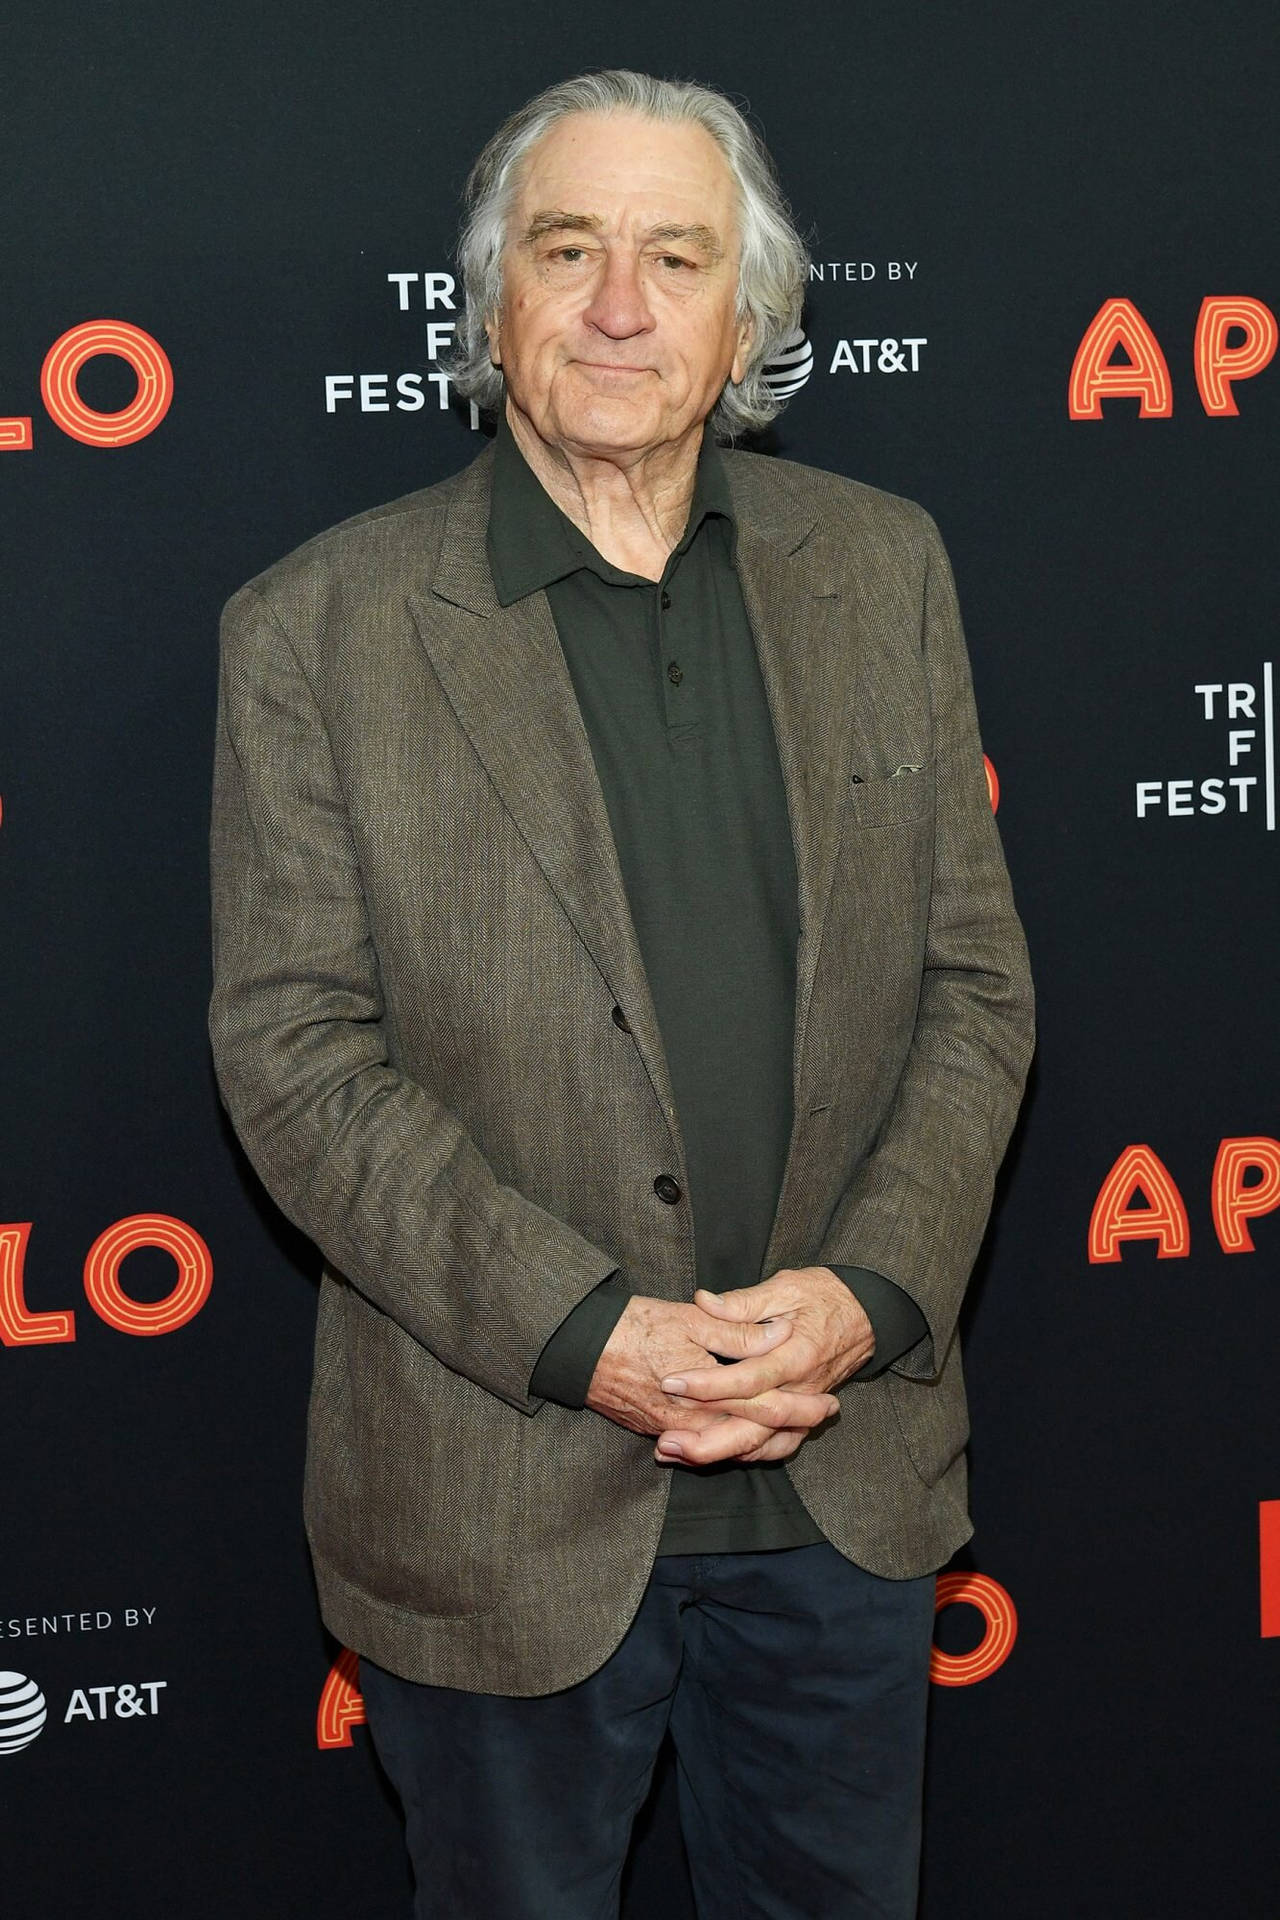 Robert De Niro On Stage At The Apollo Theater Background